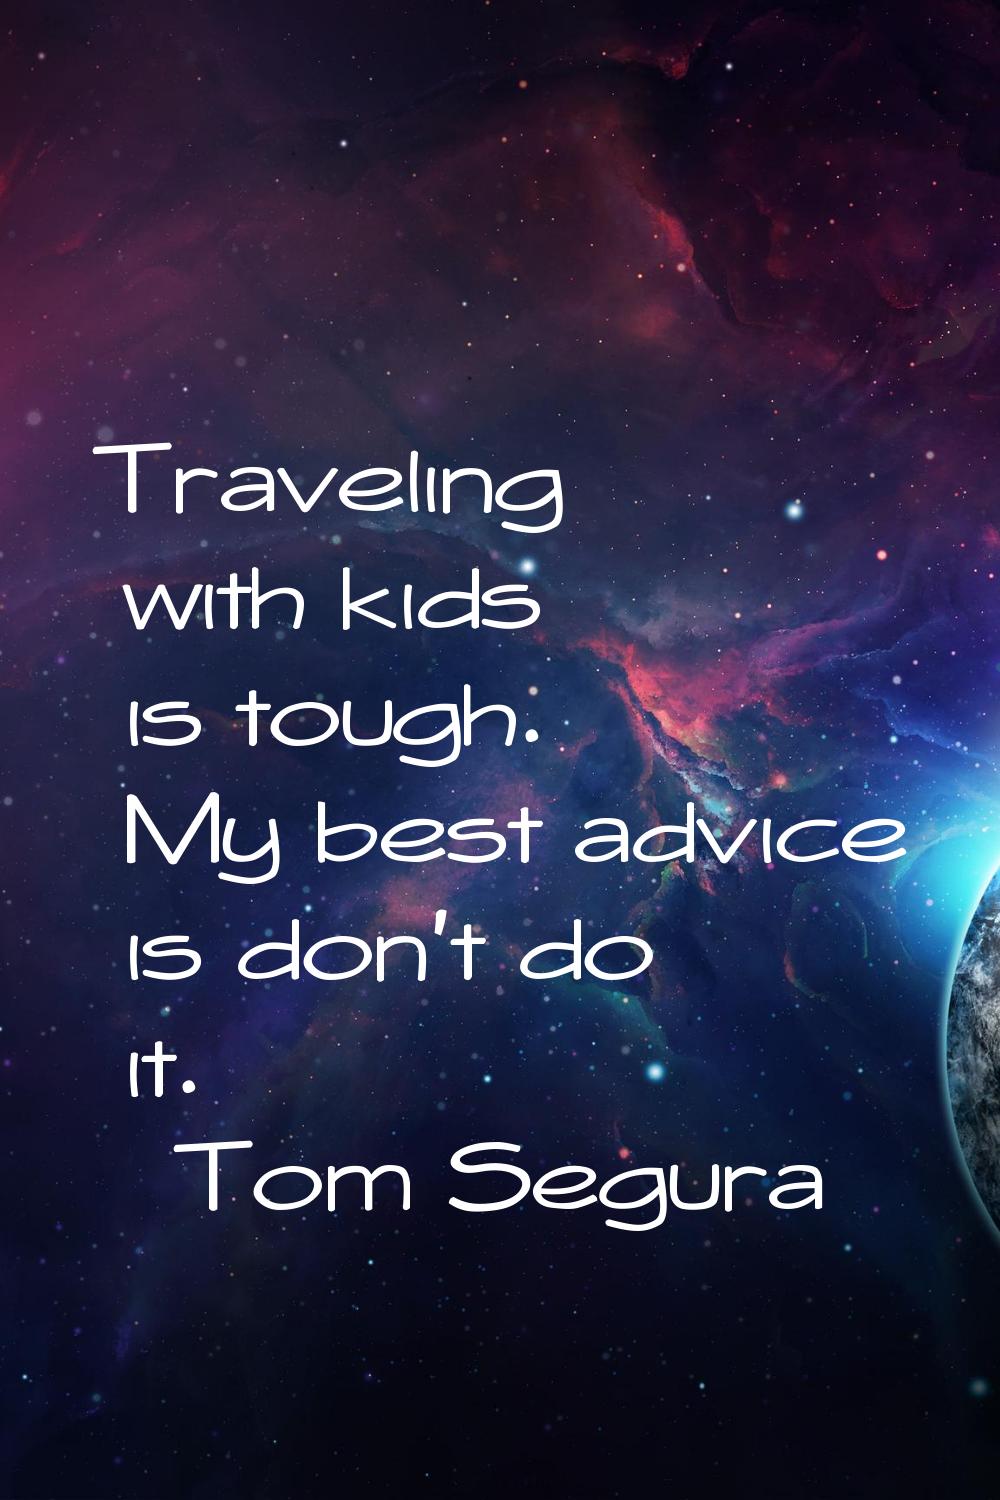 Traveling with kids is tough. My best advice is don't do it.